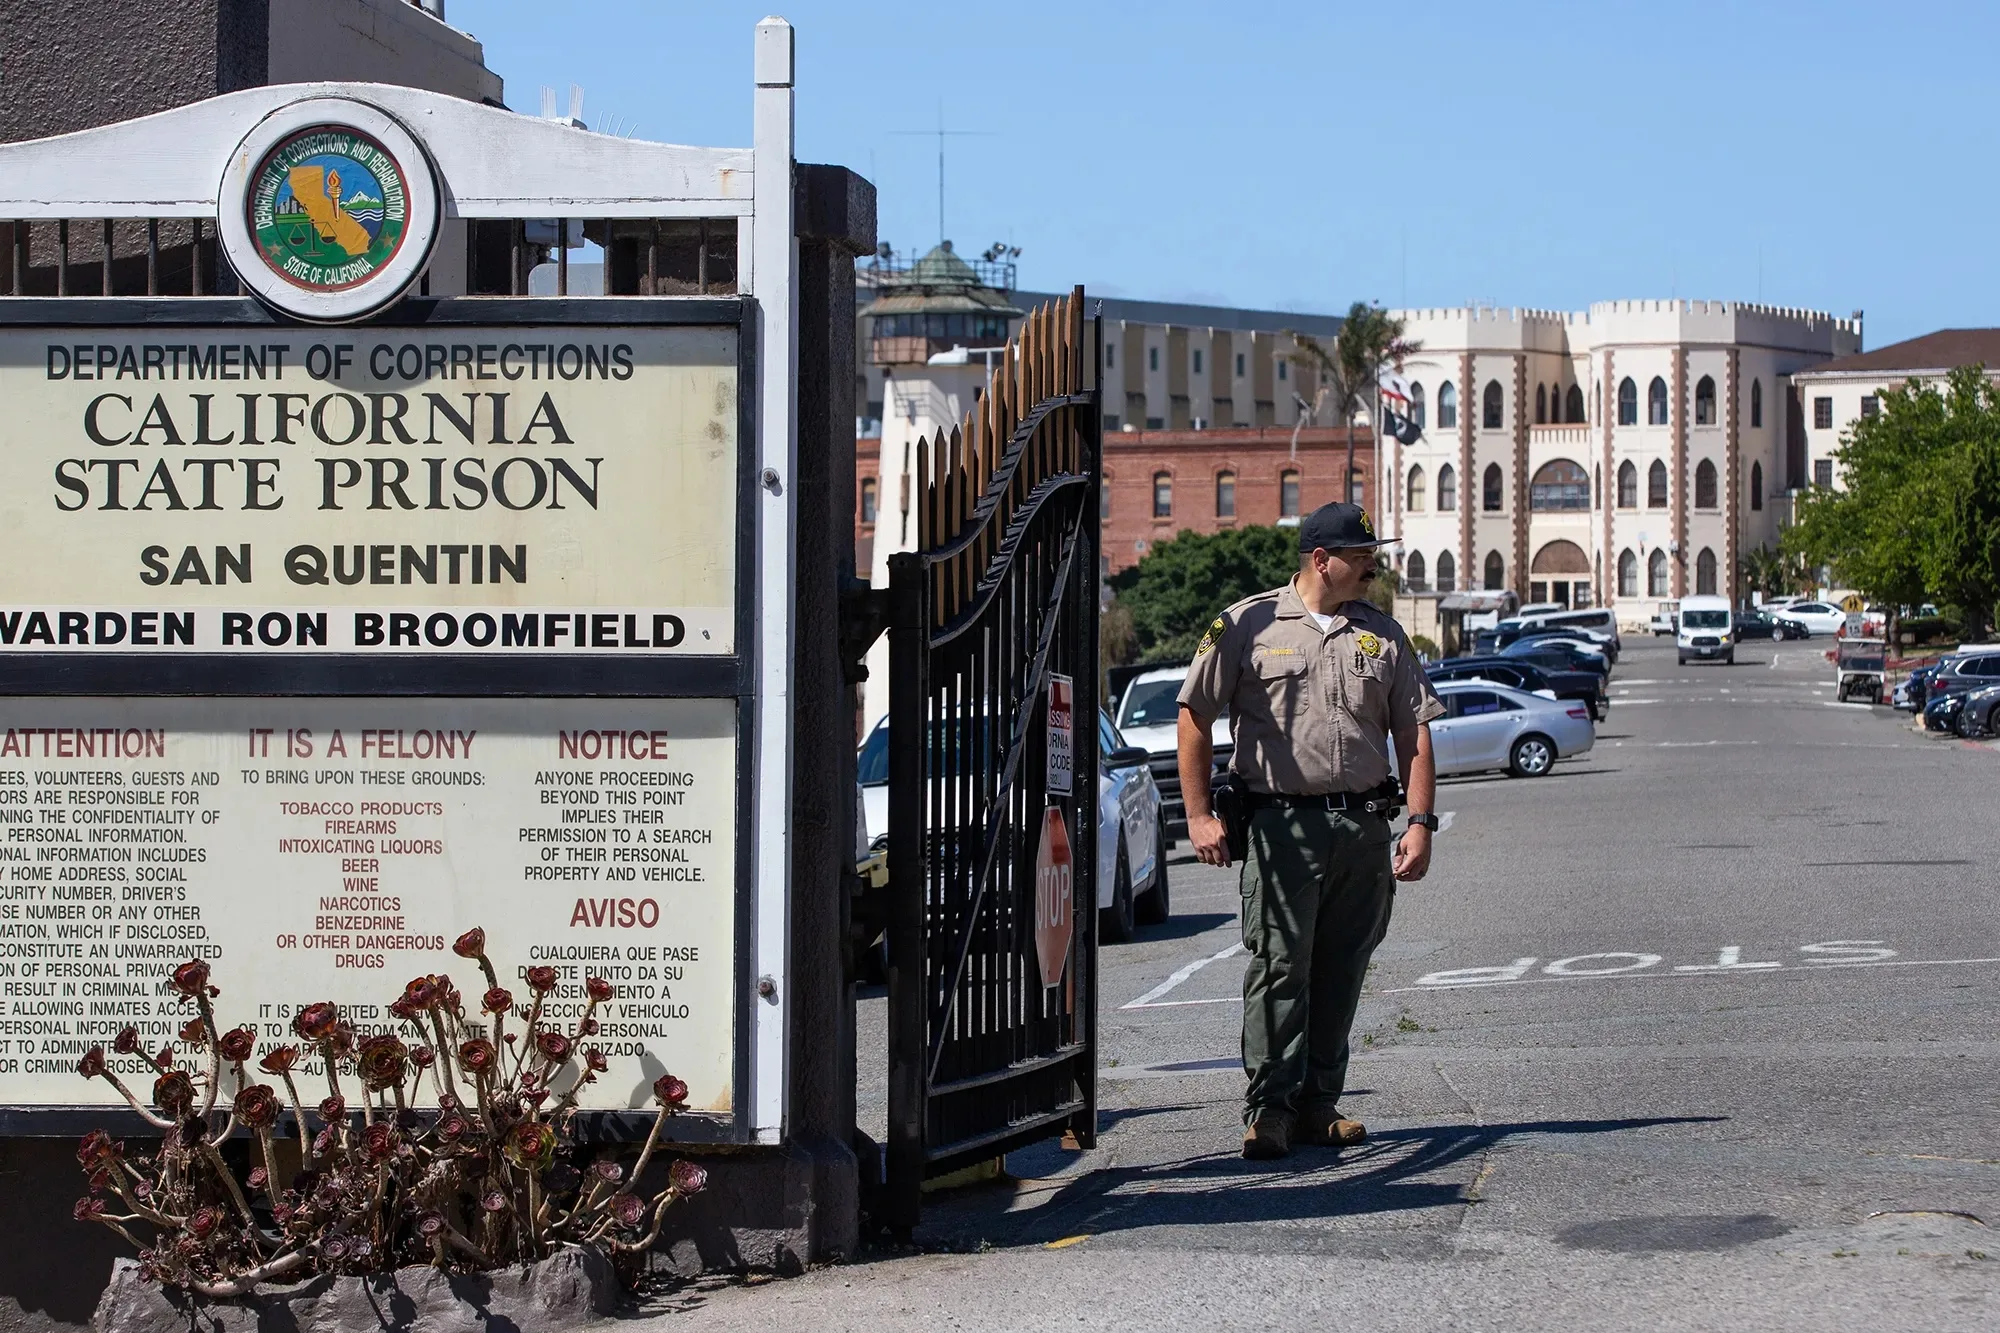 A prison guard in uniform stands in front of a gate with a building in the background.